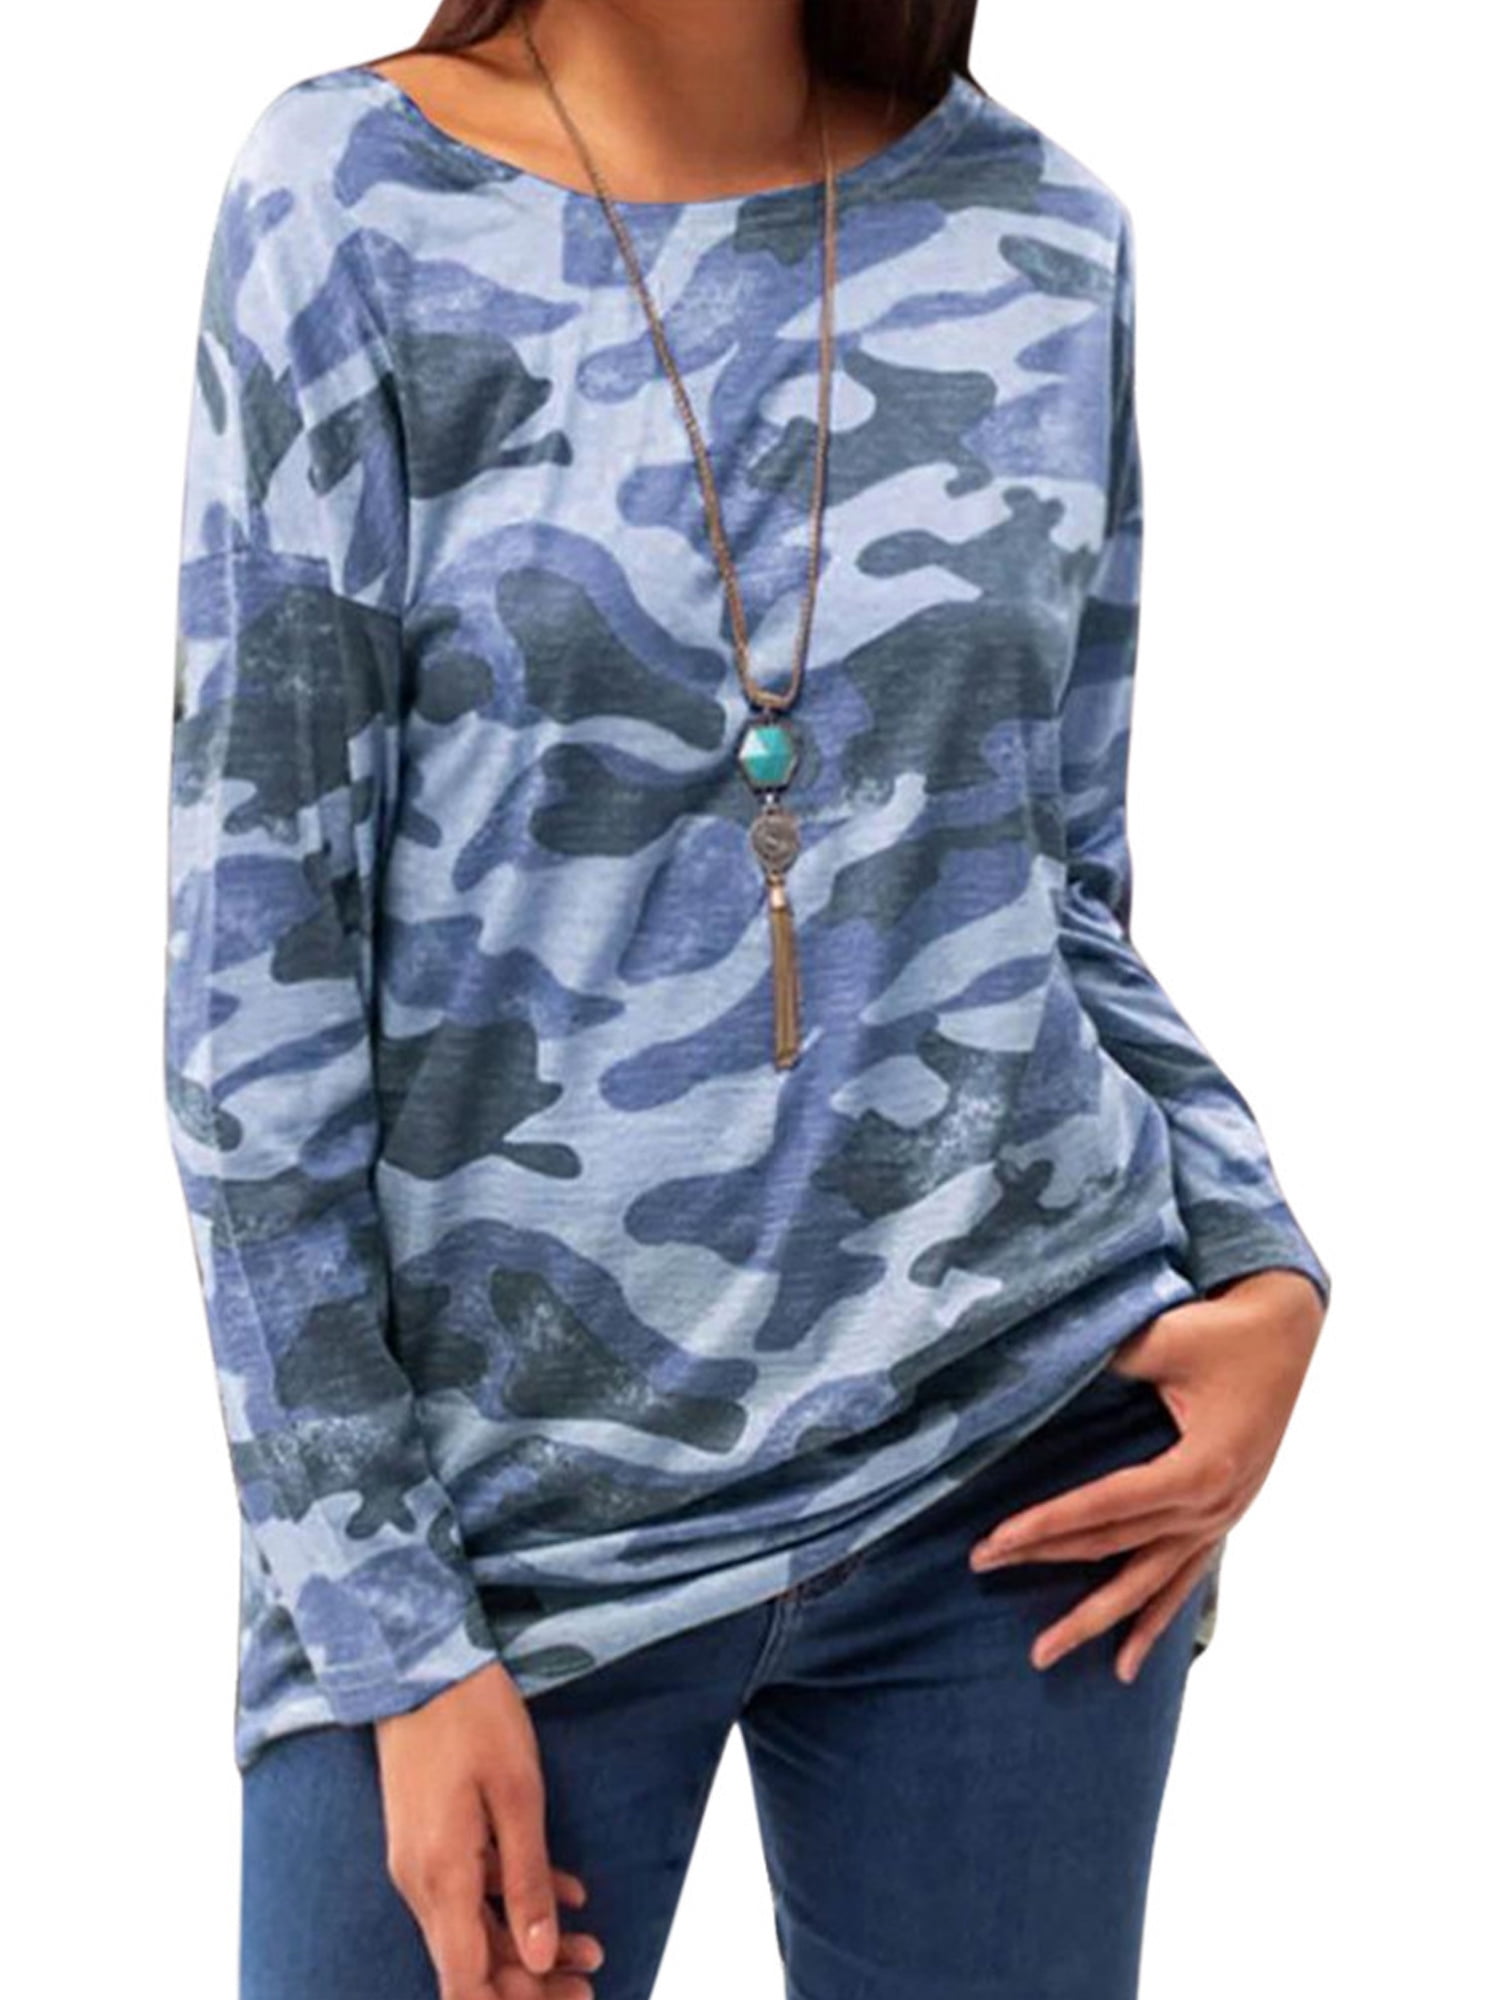 Camouflage Long Sleeve DICPOLIA Womens Loose Casual Shirt S-2XL 